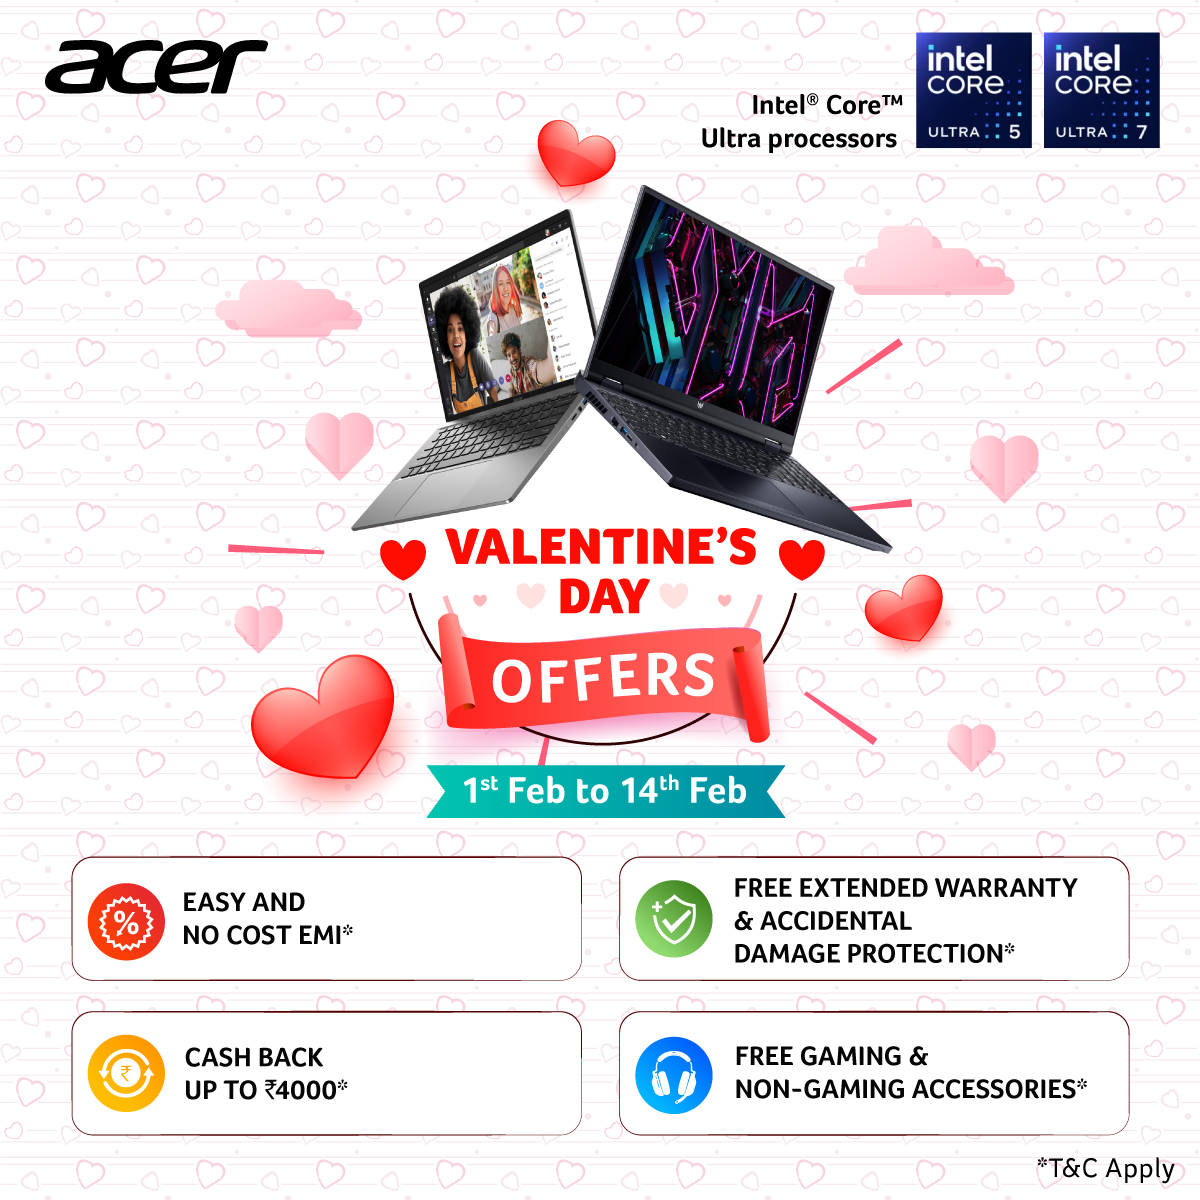 Celebrate Valentine's Day with the best deals and offers from Acer